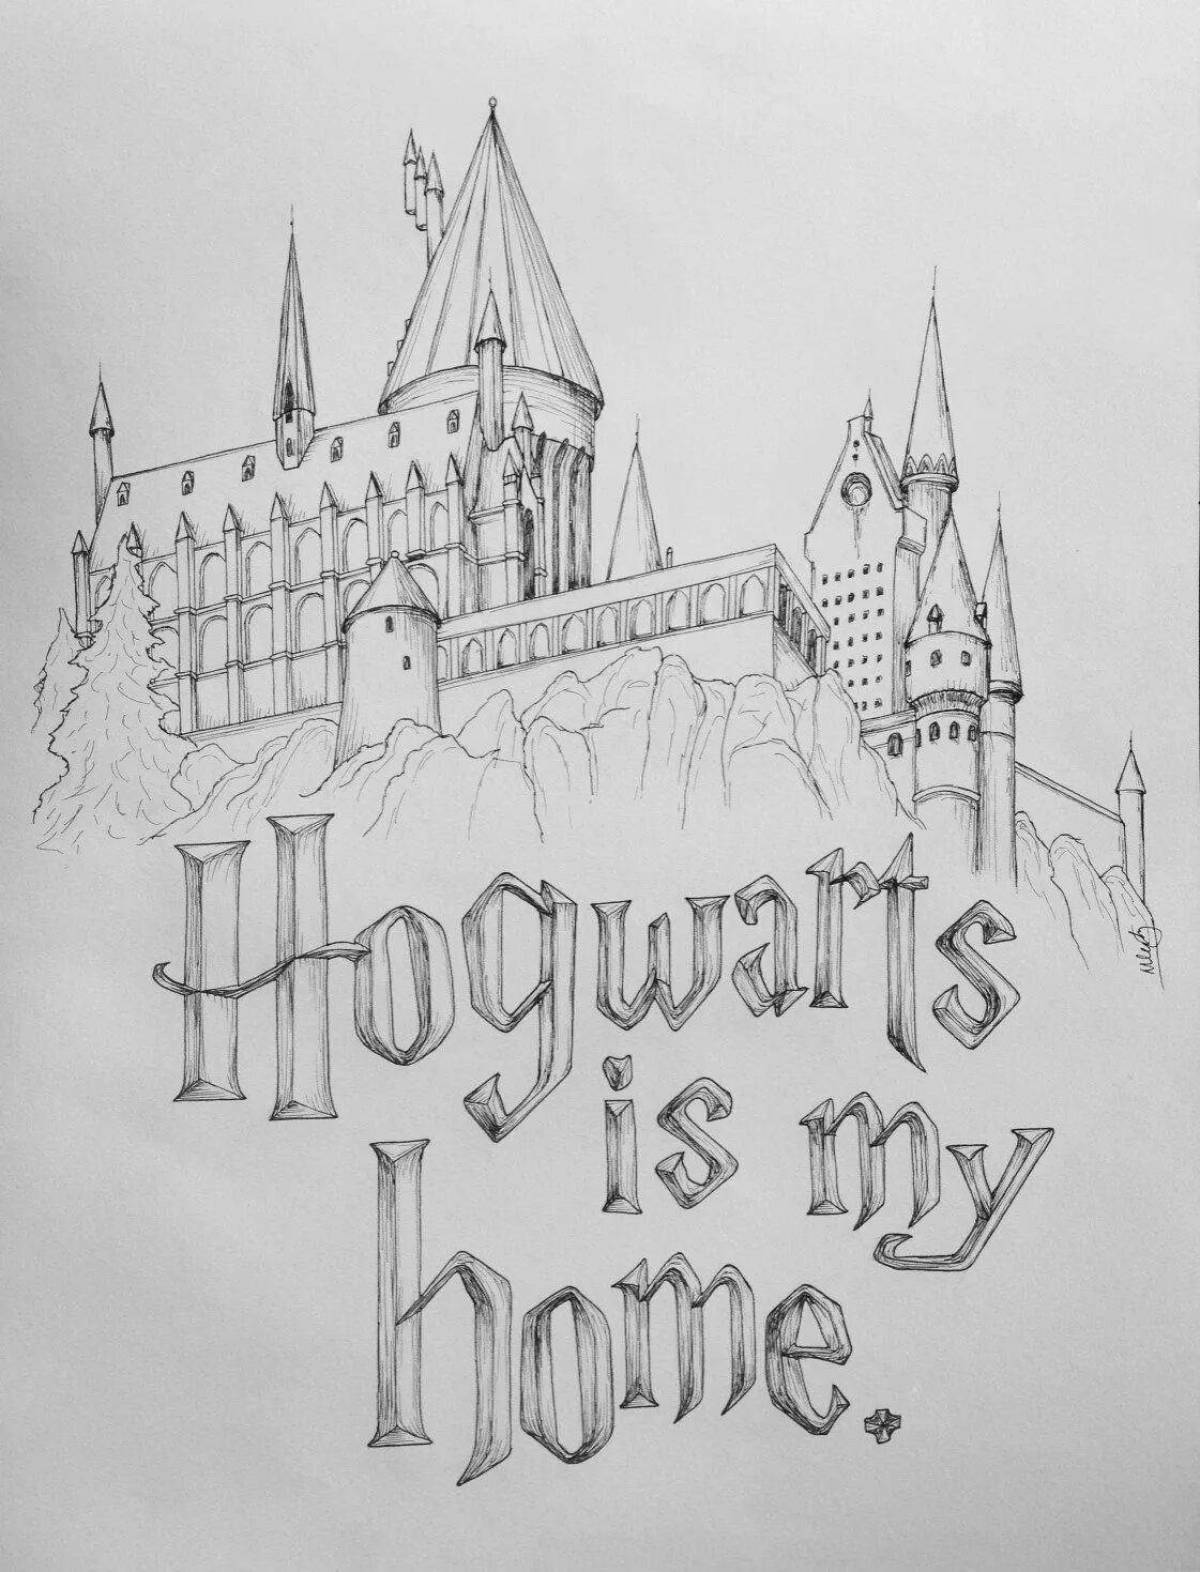 Great school of witchcraft and wizardry coloring book for harry potter fans